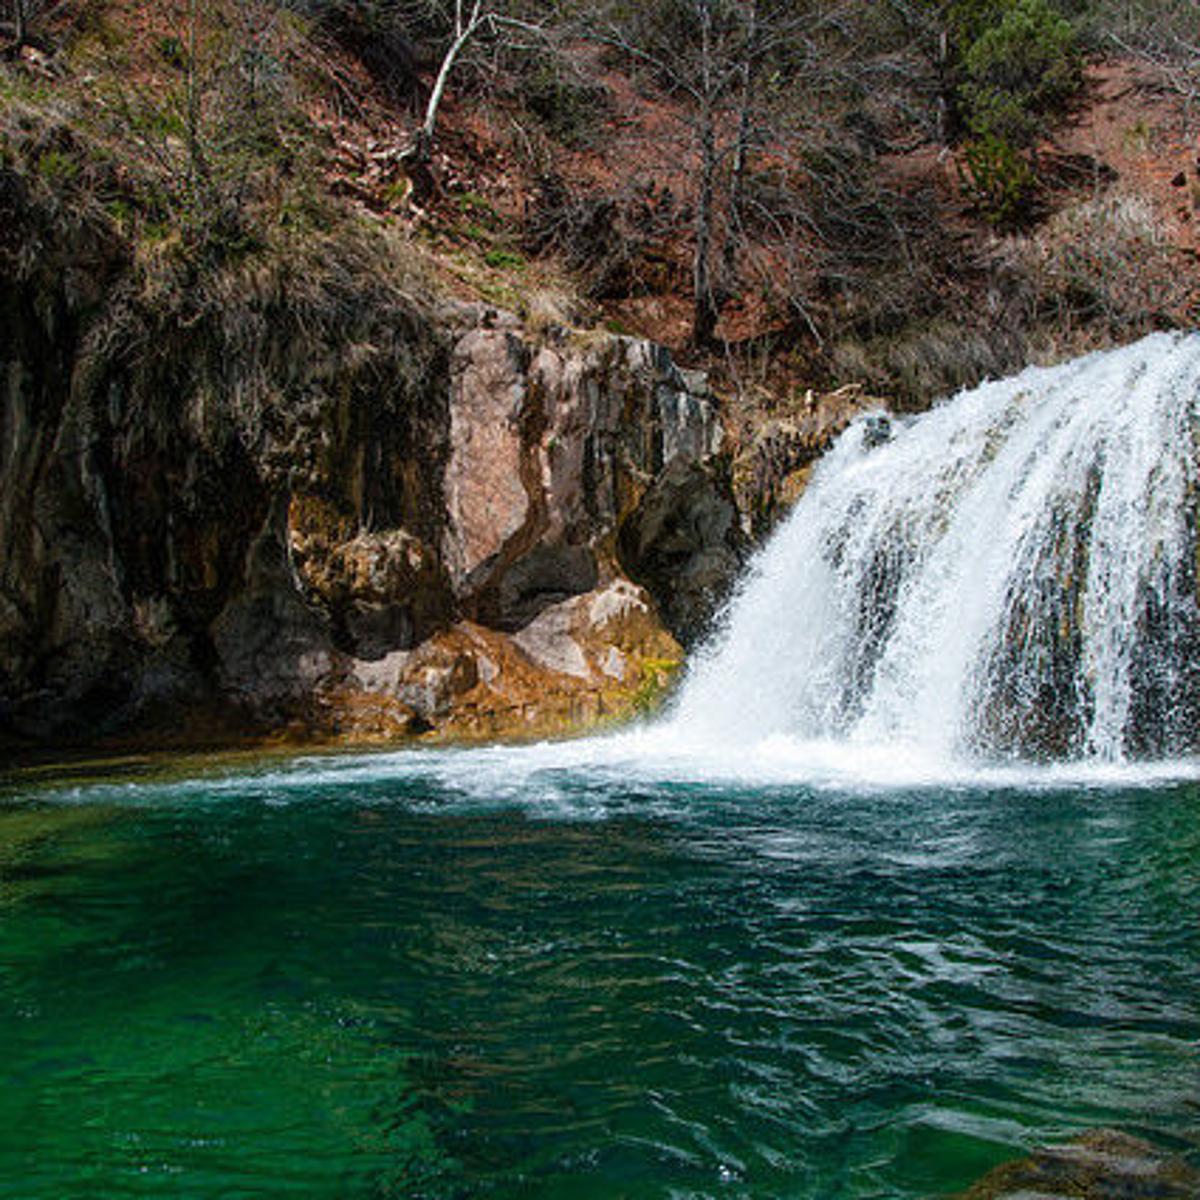 Fossil Creek Comments Show A Public Divided Over Questions Of